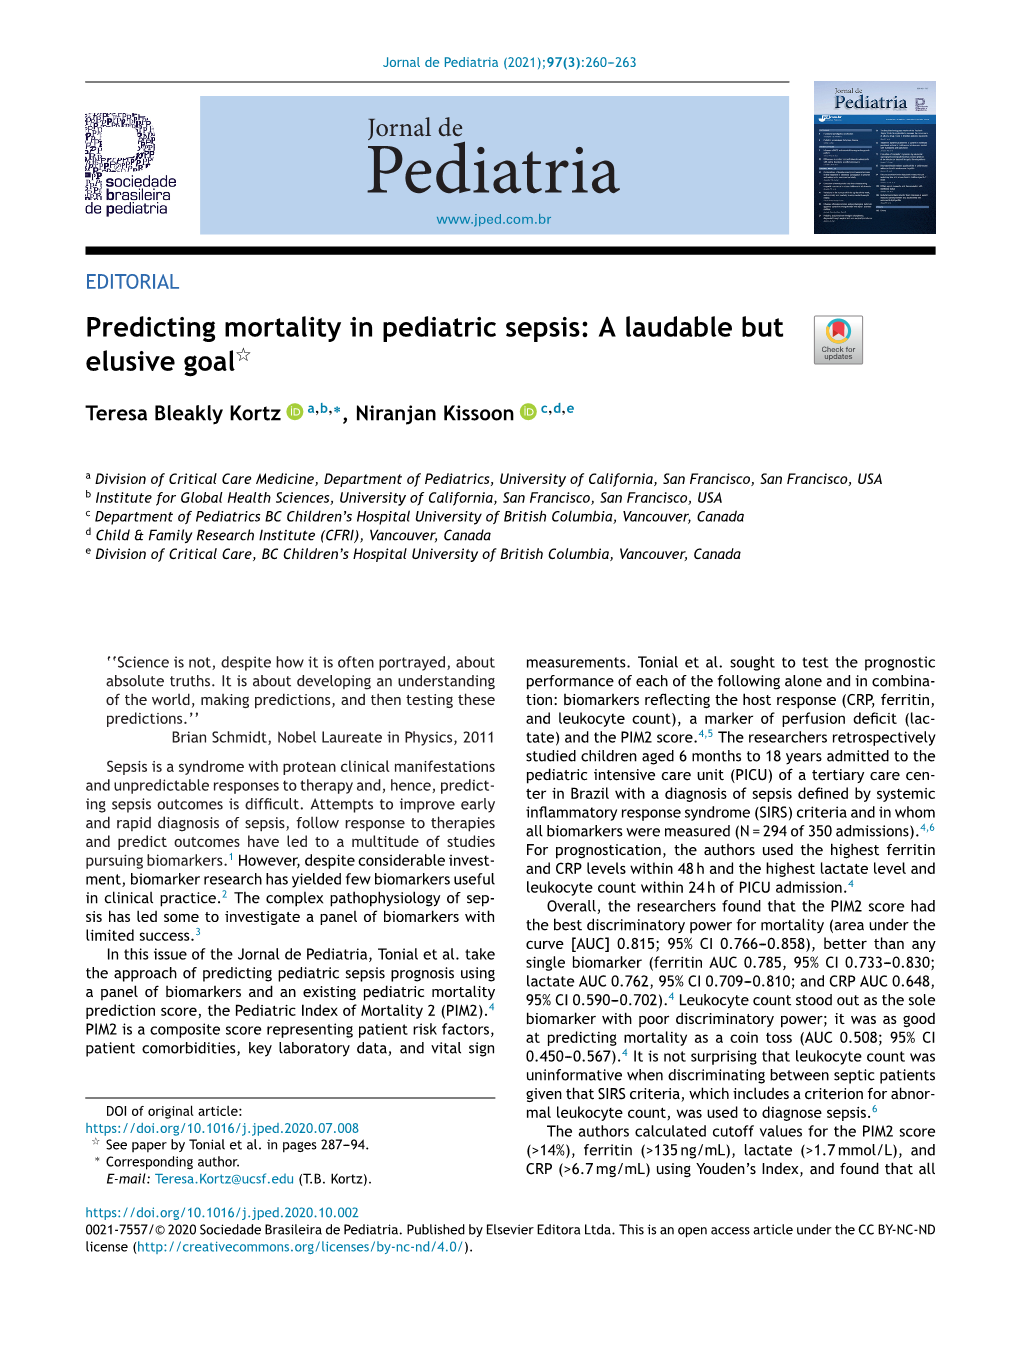 Predicting Mortality in Pediatric Sepsis: a Laudable but ଝ Elusive Goal